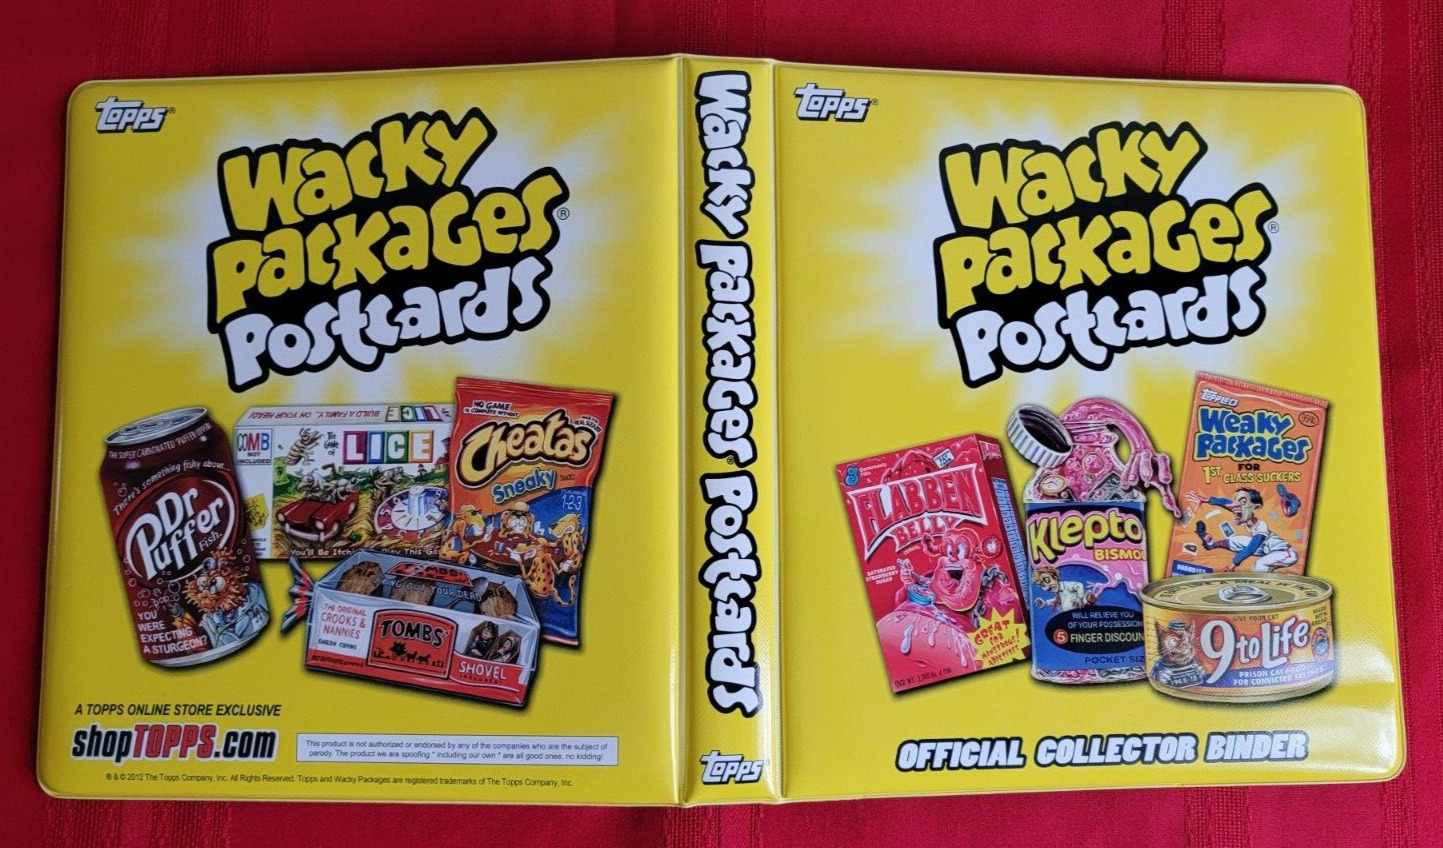 2012 TOPPS WACKY PACKAGES POSTCARDS OFFICIAL YELLOW BINDER   @@ RARE @@